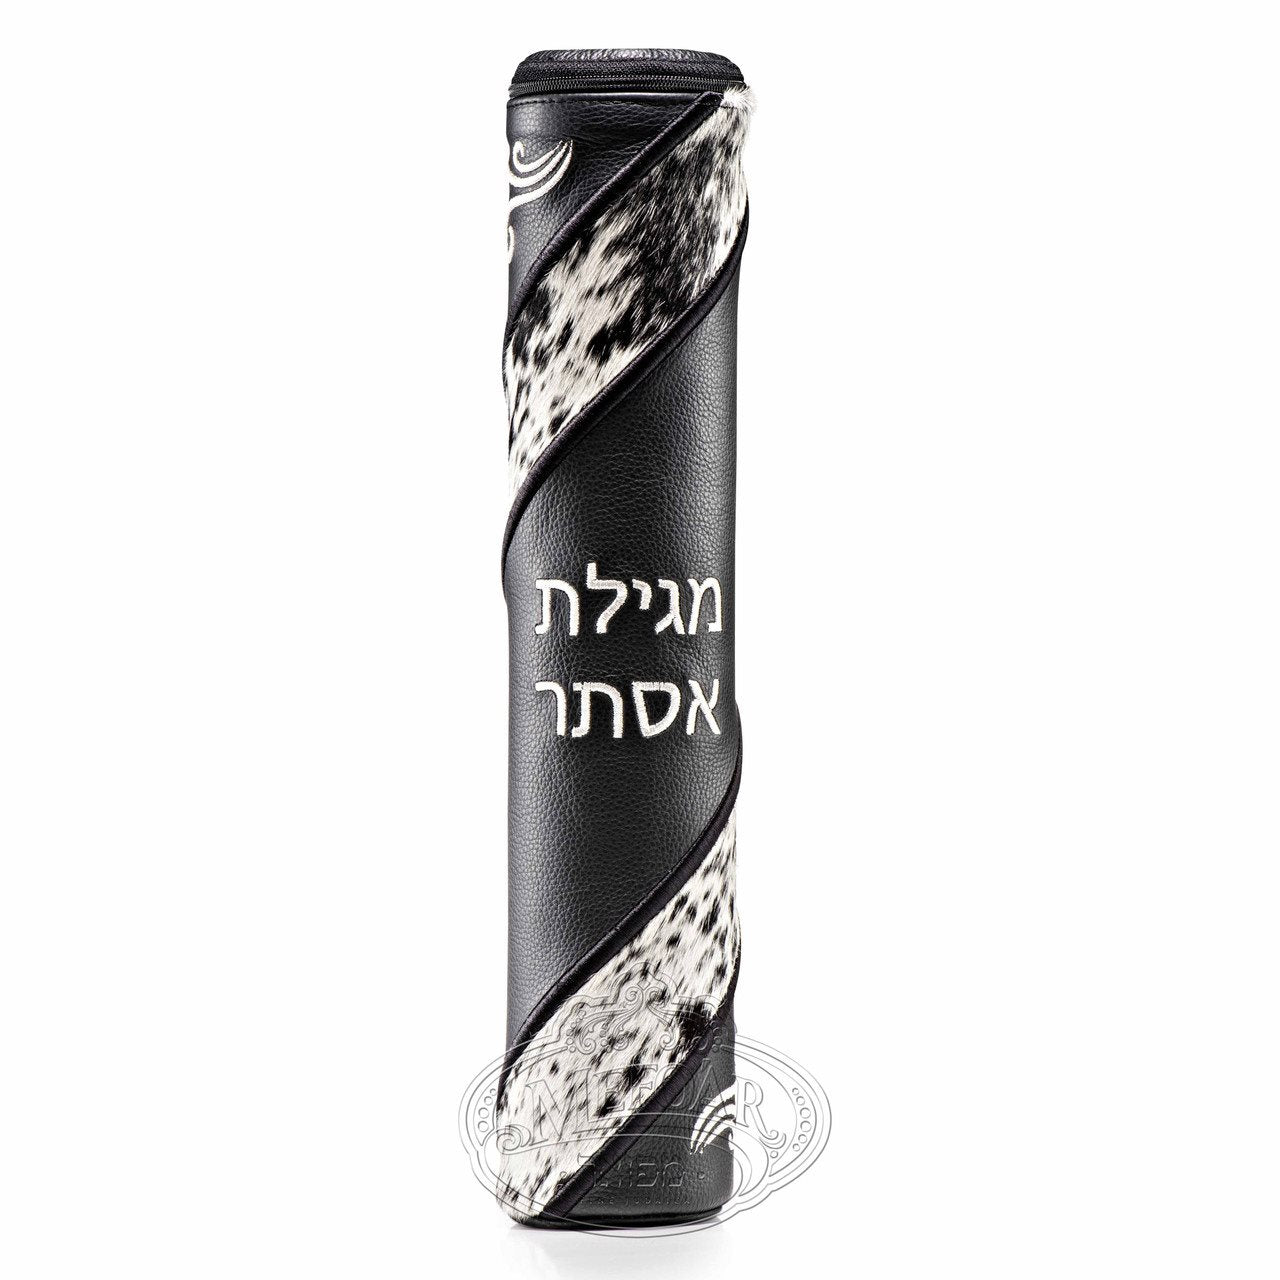 Black Leather Megillah Holder, with Black and White Fur and Black,SiIver Embroidery